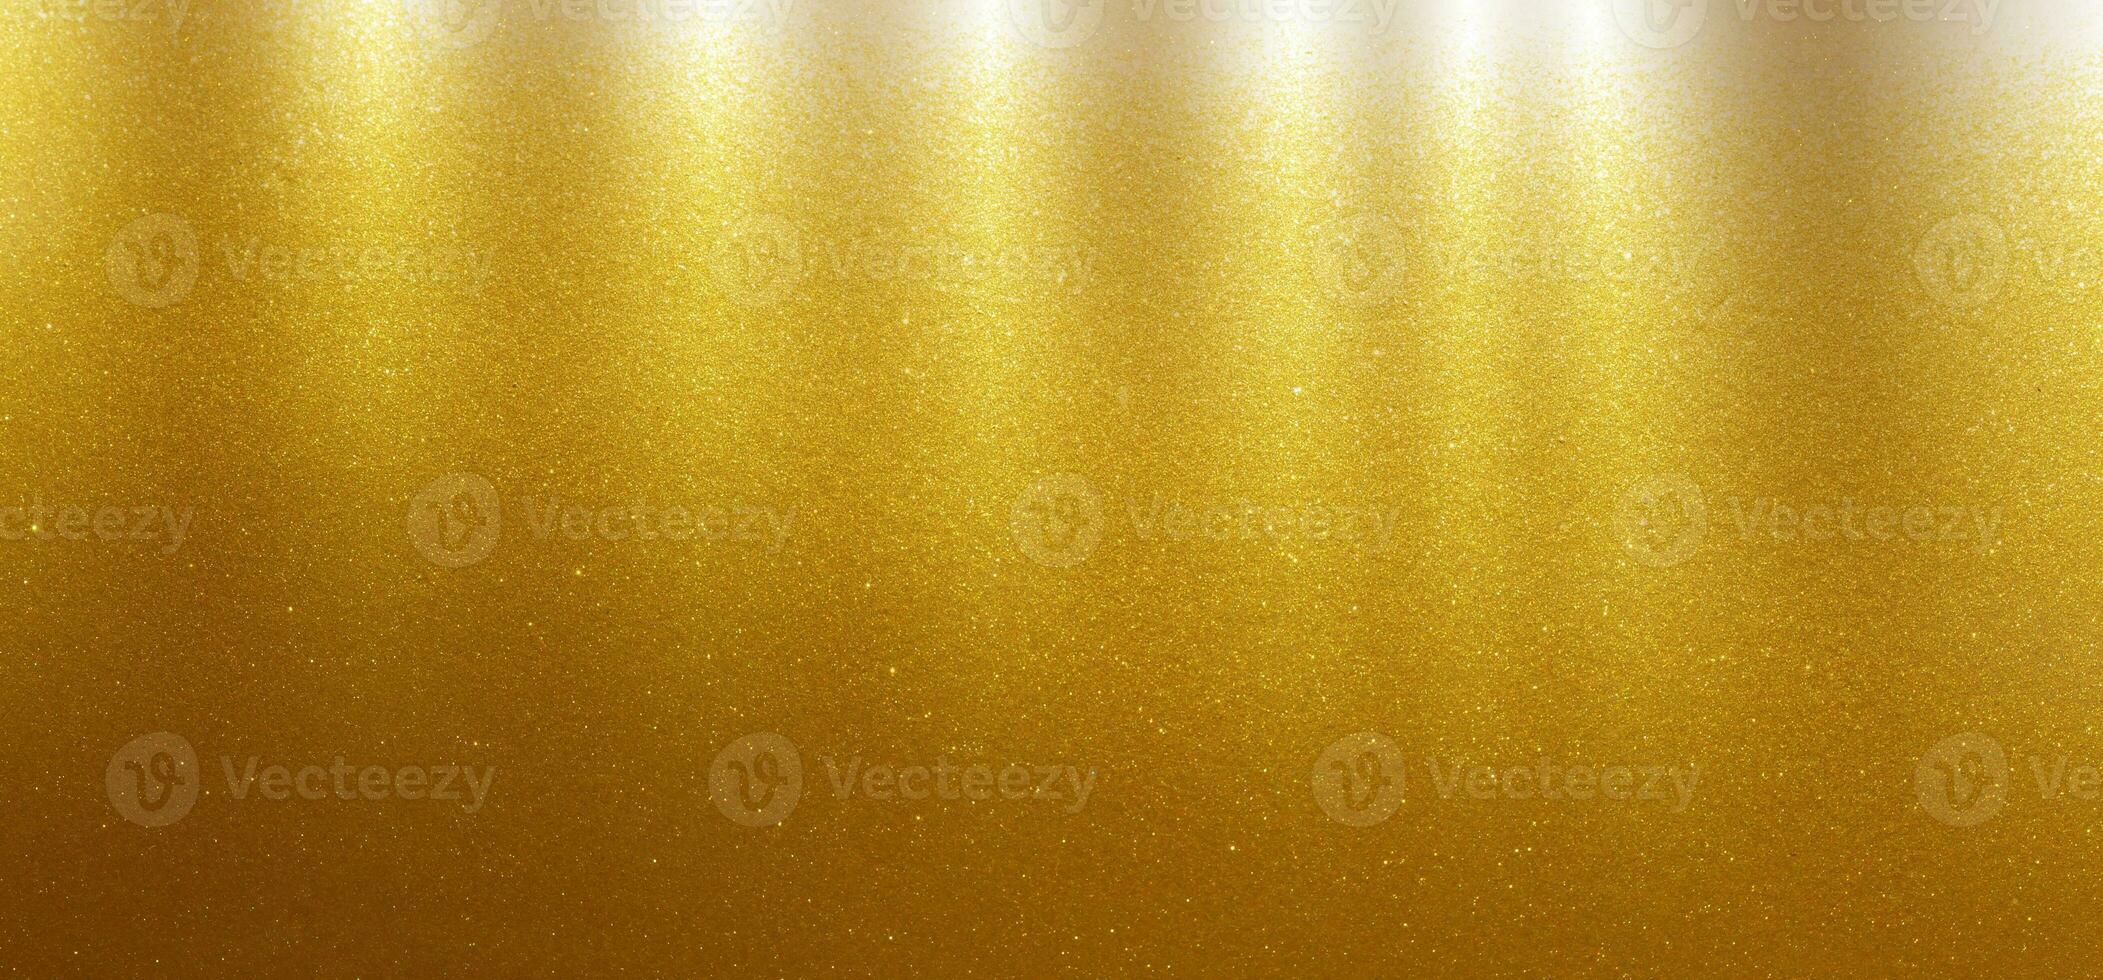 Gold texture background photo